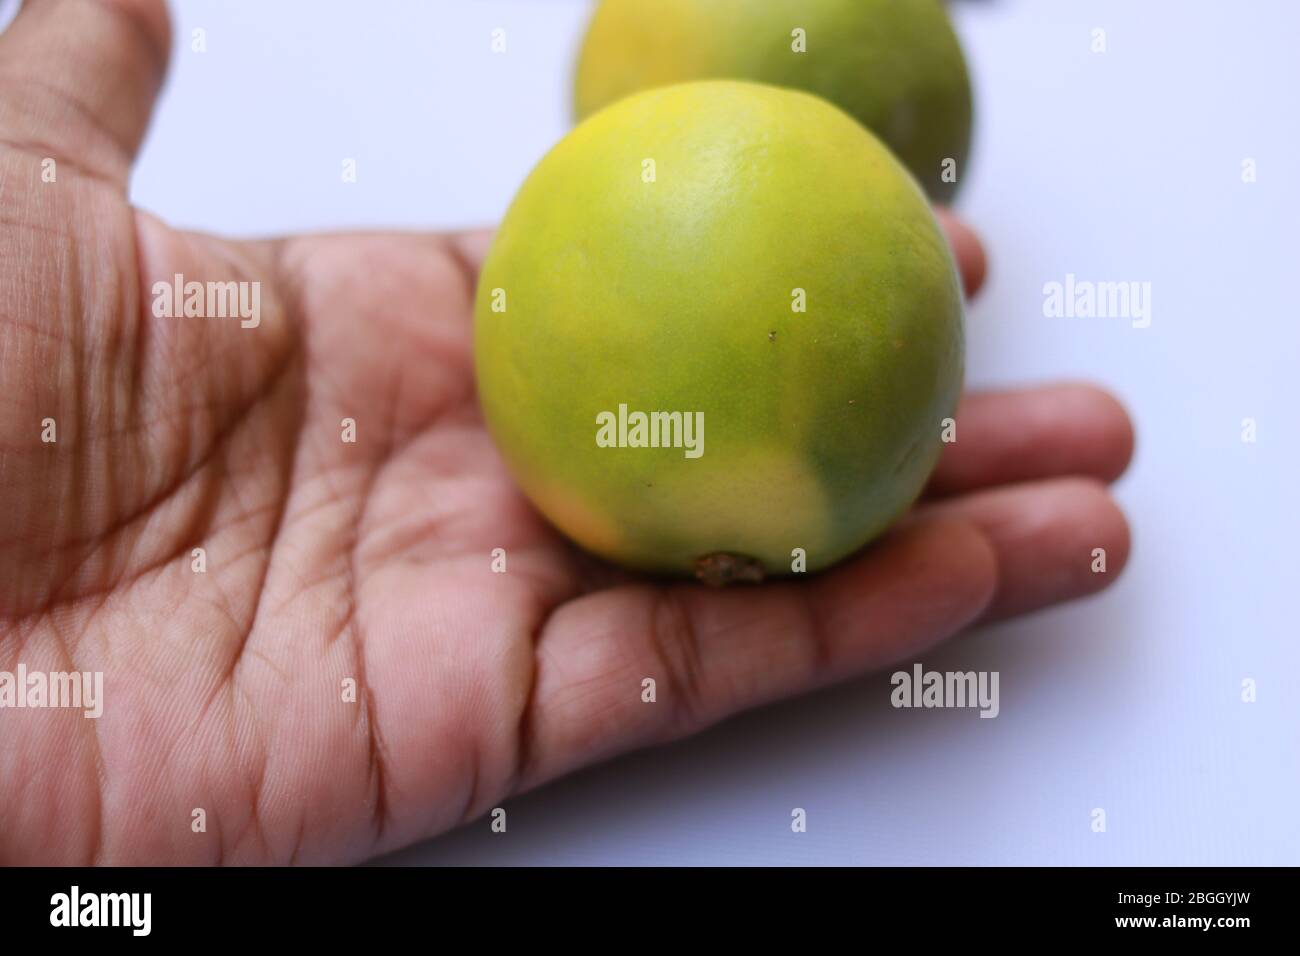 Yellow and green color whole ripe Sweet lime fruits or Citrus limetta Stock Photo